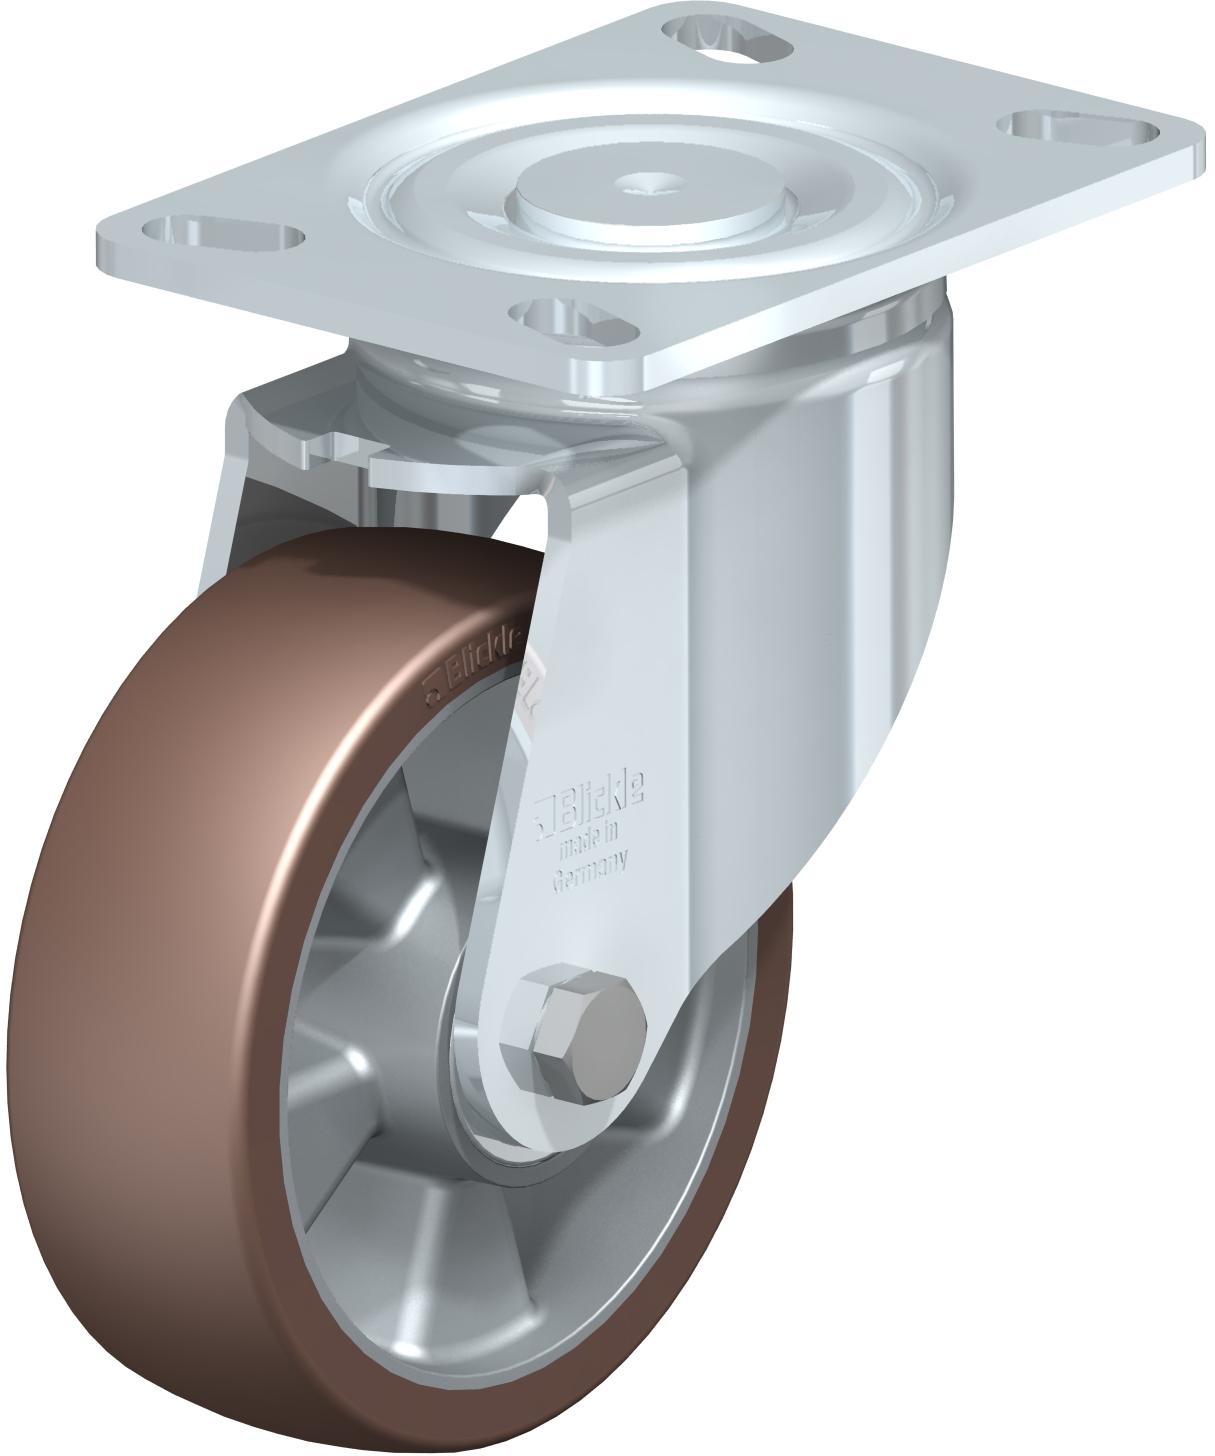 Heavy Duty Industrial Large Top Plate Casters - Swivel, Ball Bearing, Blickle Besthane Brown Polyurethane Tread On Aluminum Core Wheel LH-ALB 150K-16